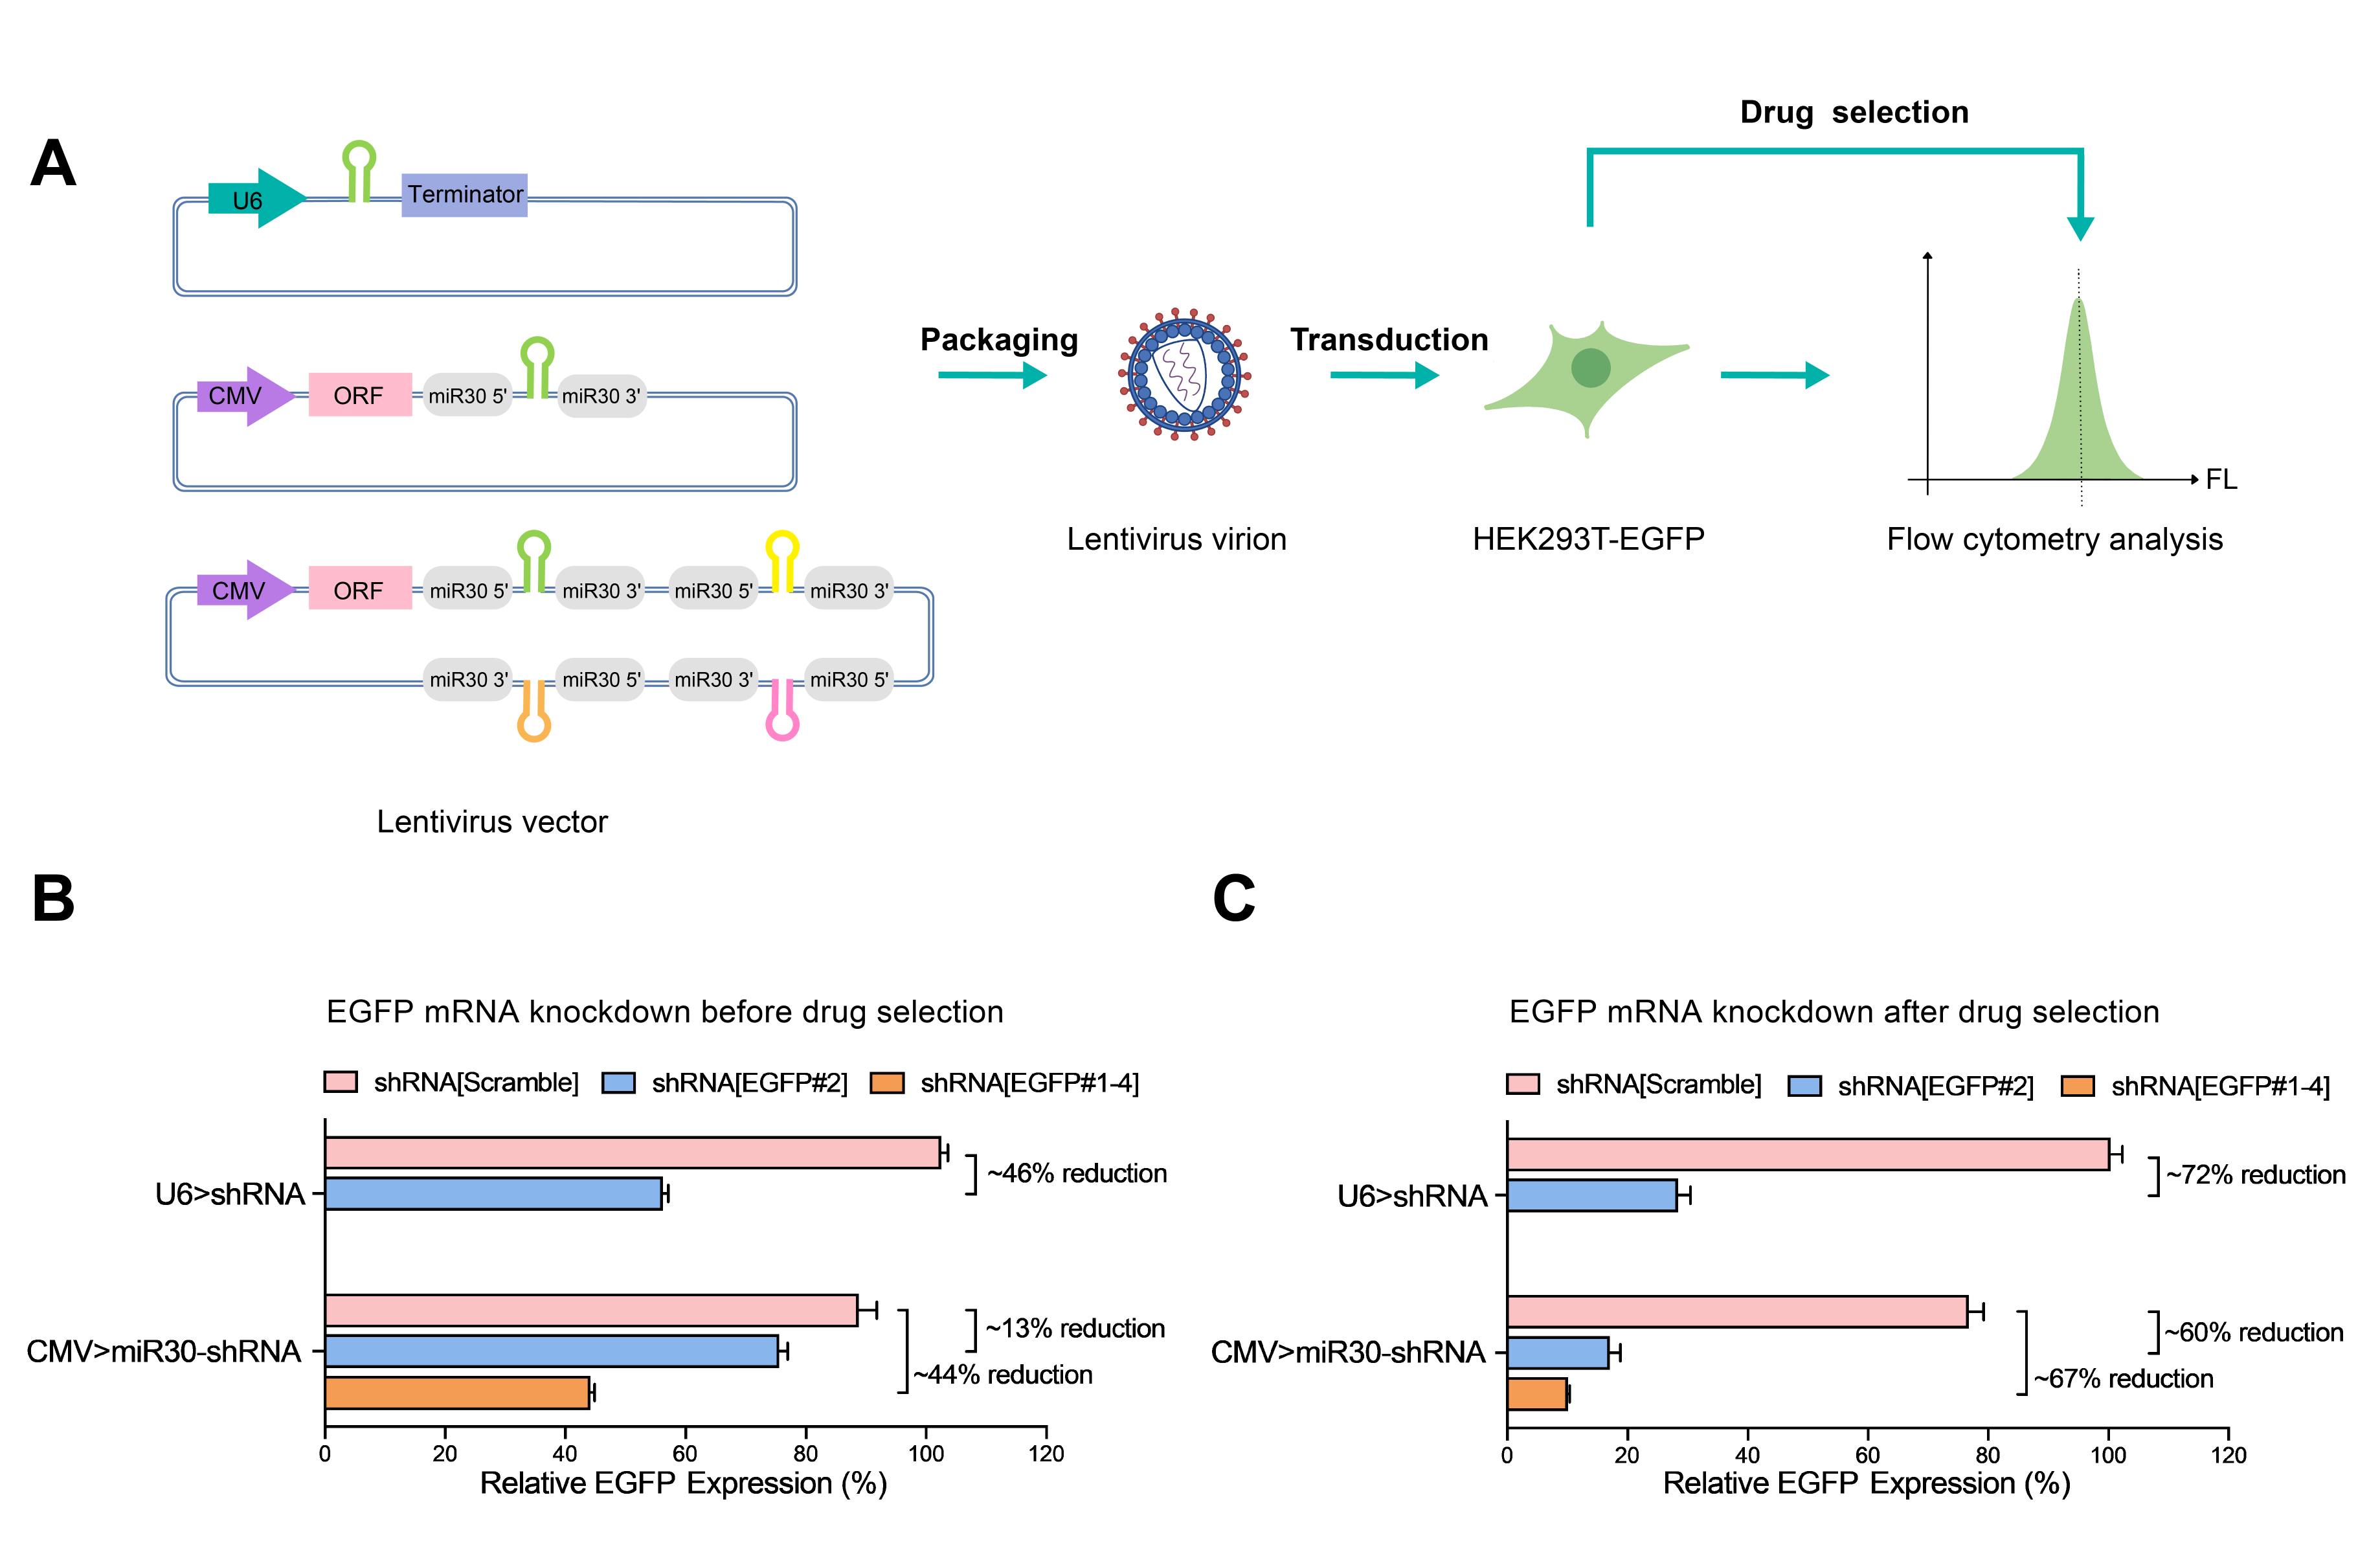 Case study's methods and results: comparisons of EGFP knockdown through U6-based versus miR30-based shRNA lentiviral systems.